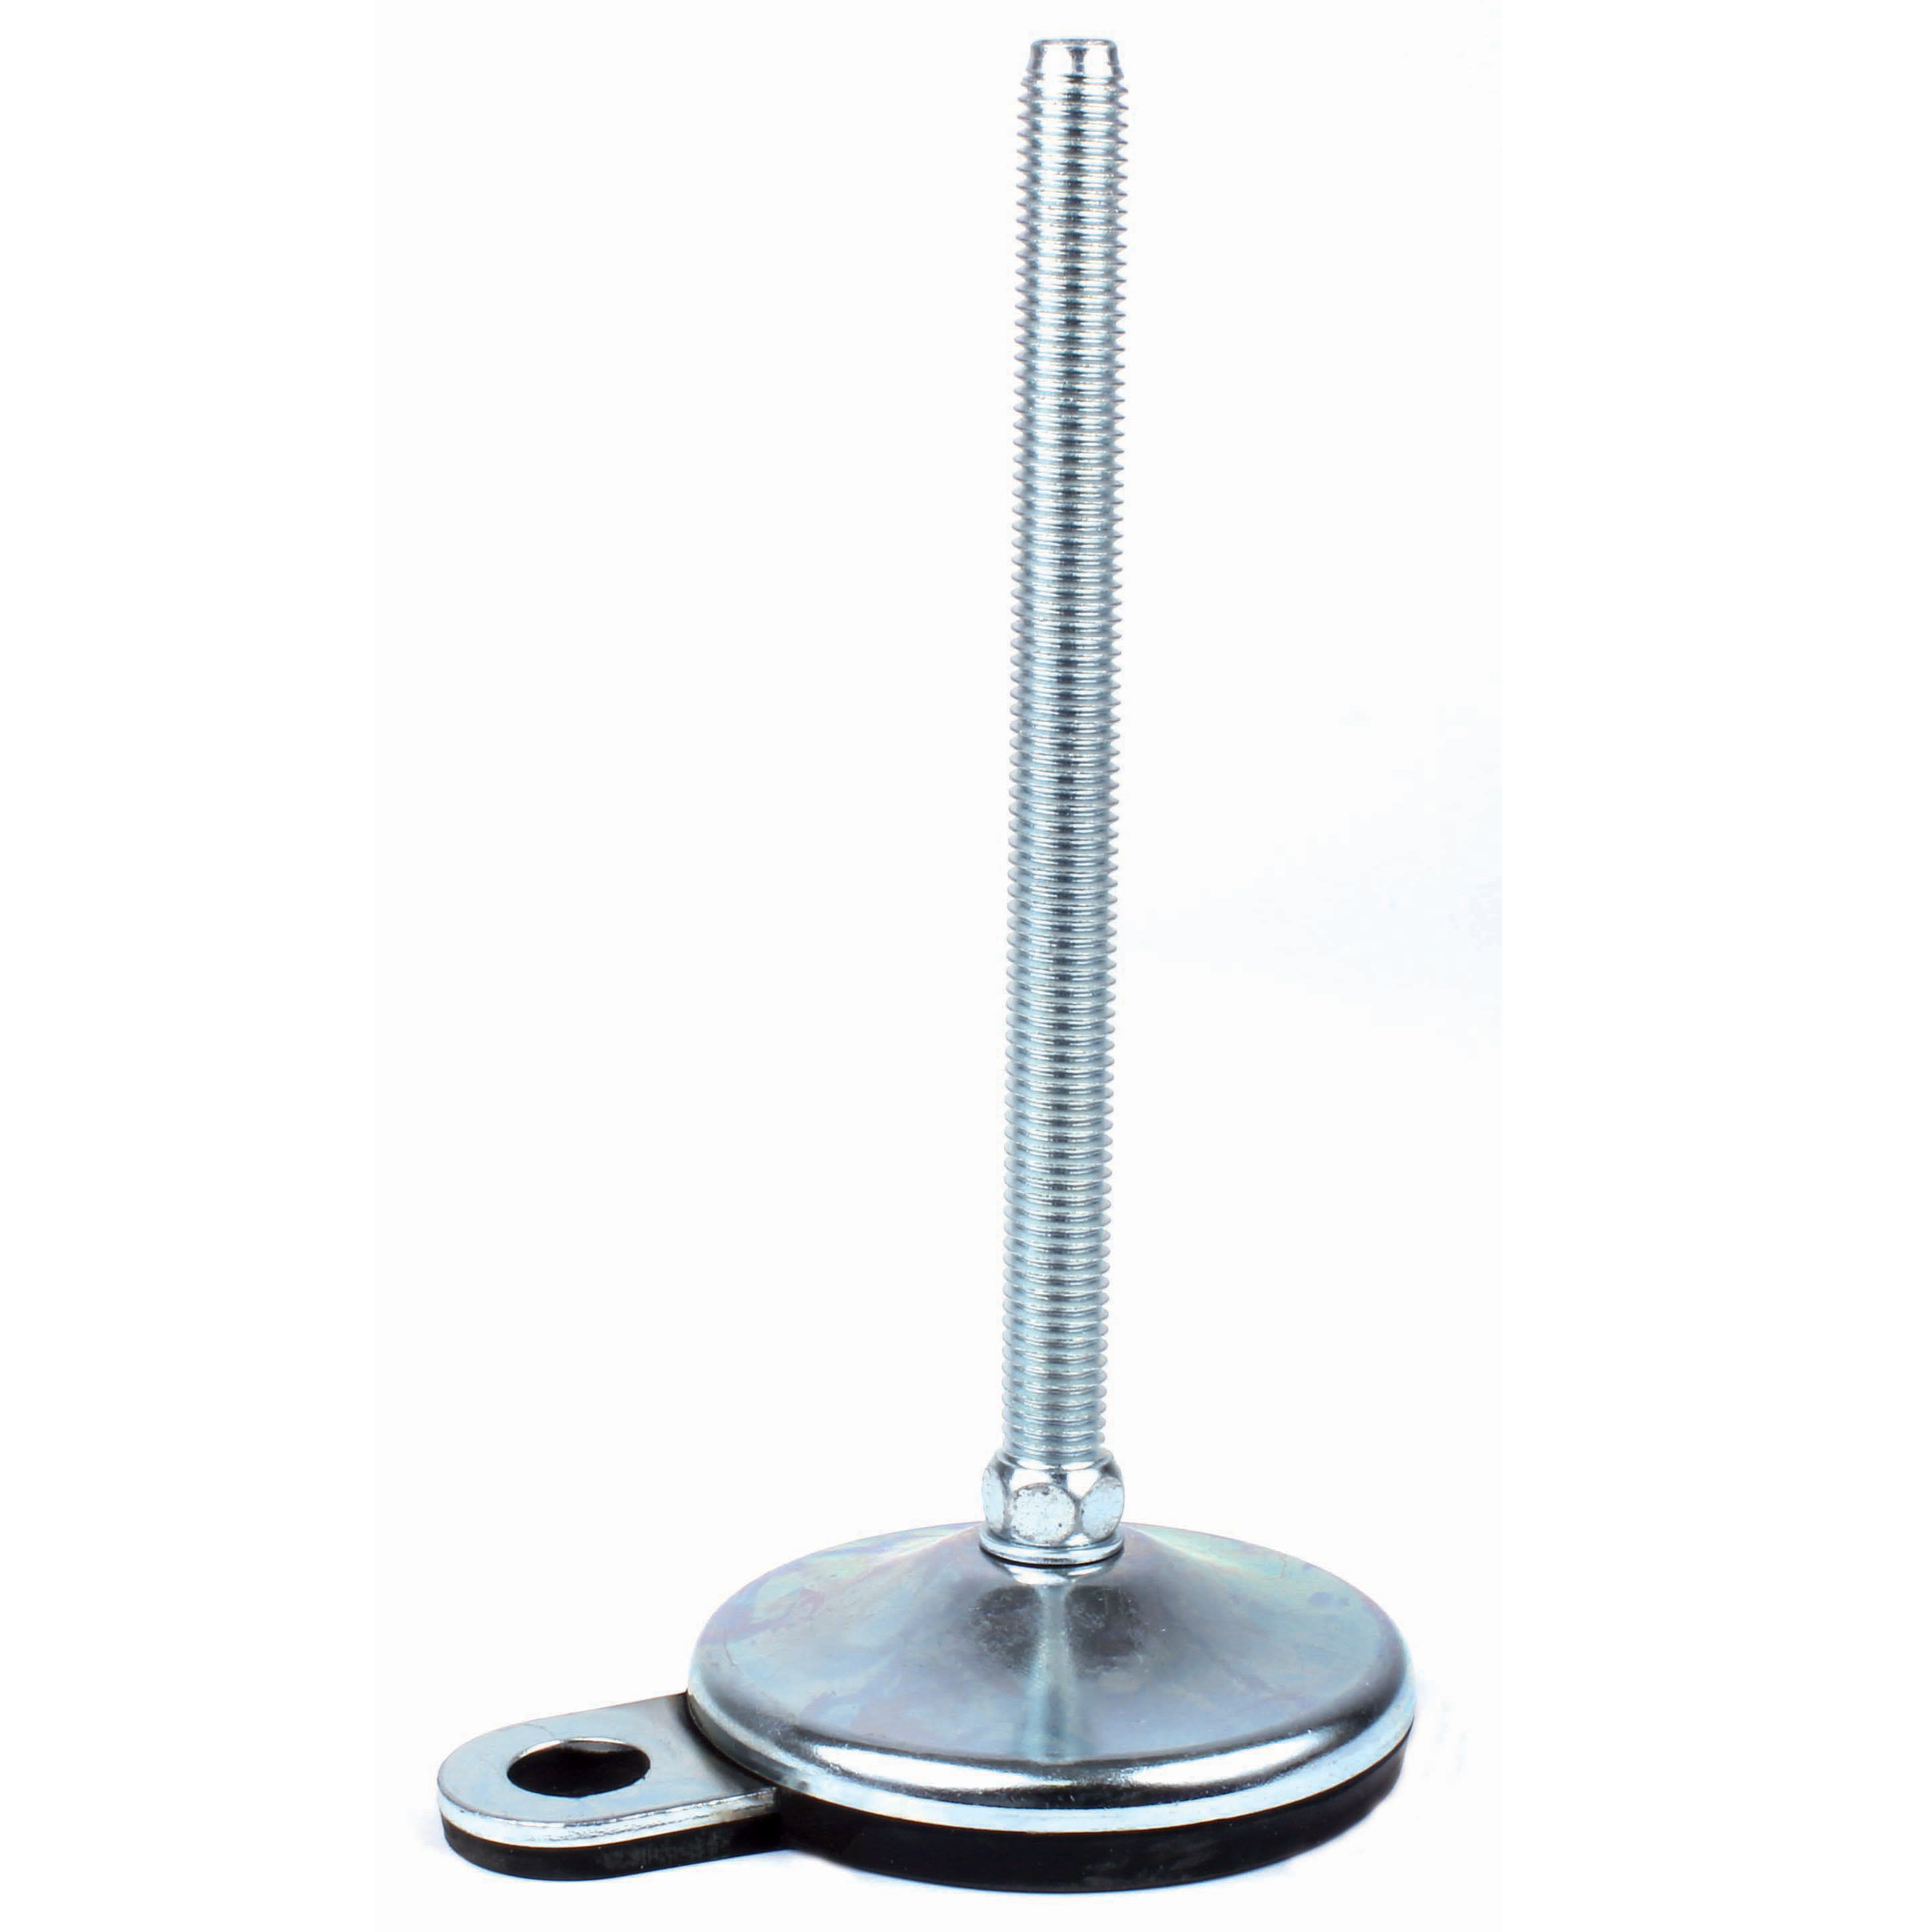 Articulated fixable foot with pressed base Ø80 - Ø 80 - Steel - 